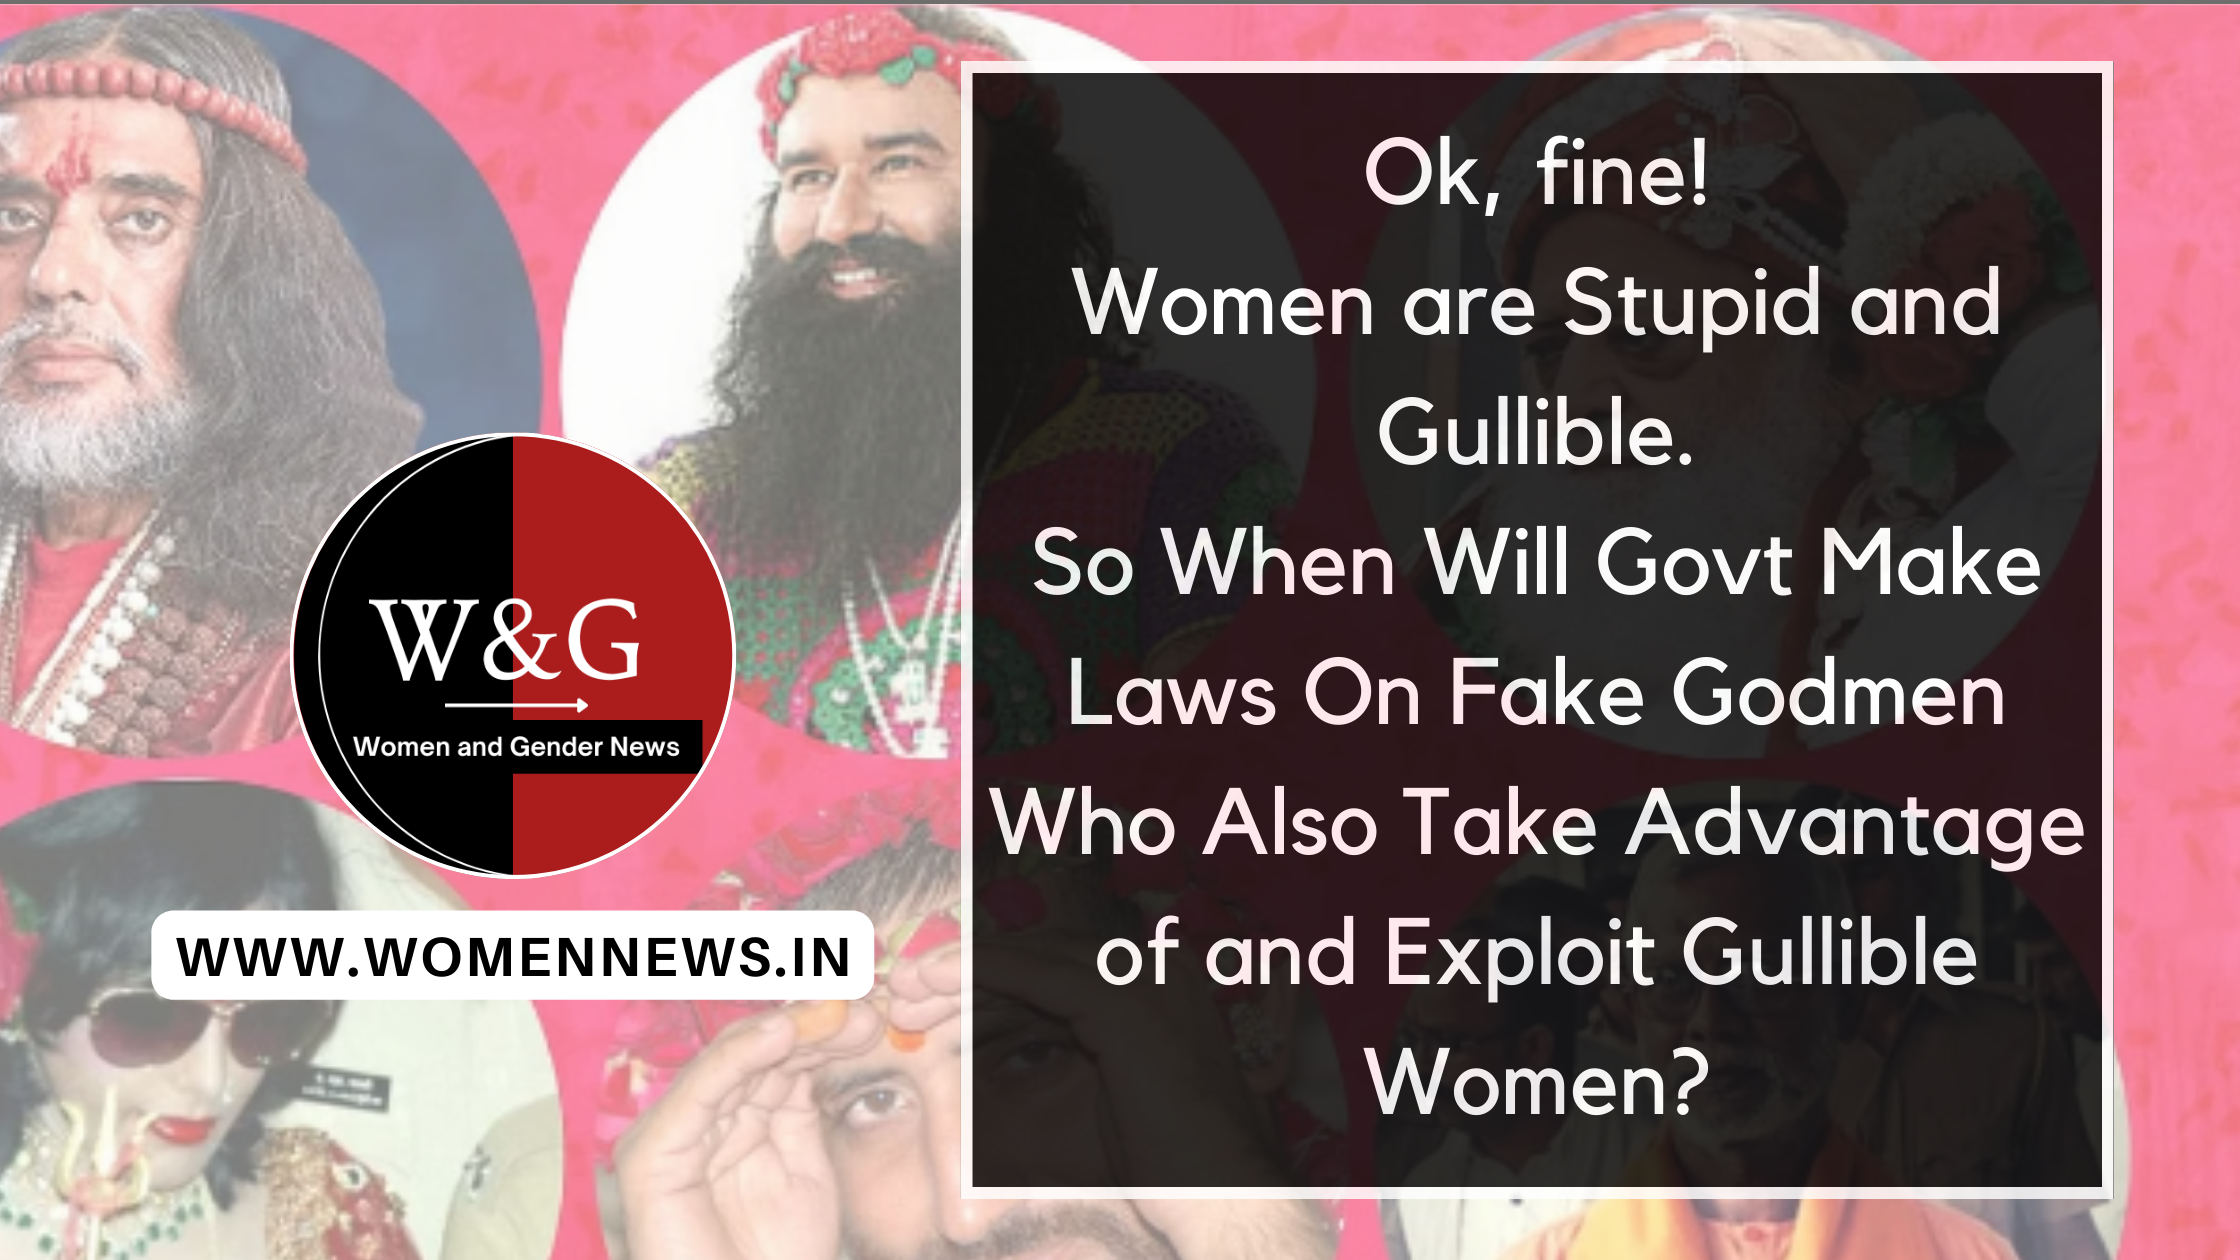 Ok, fine! All Women are Stupid and Gullible. Then Govt Must Also Make Laws On Fake Godmen Who Take Advantage of, Exploit Women